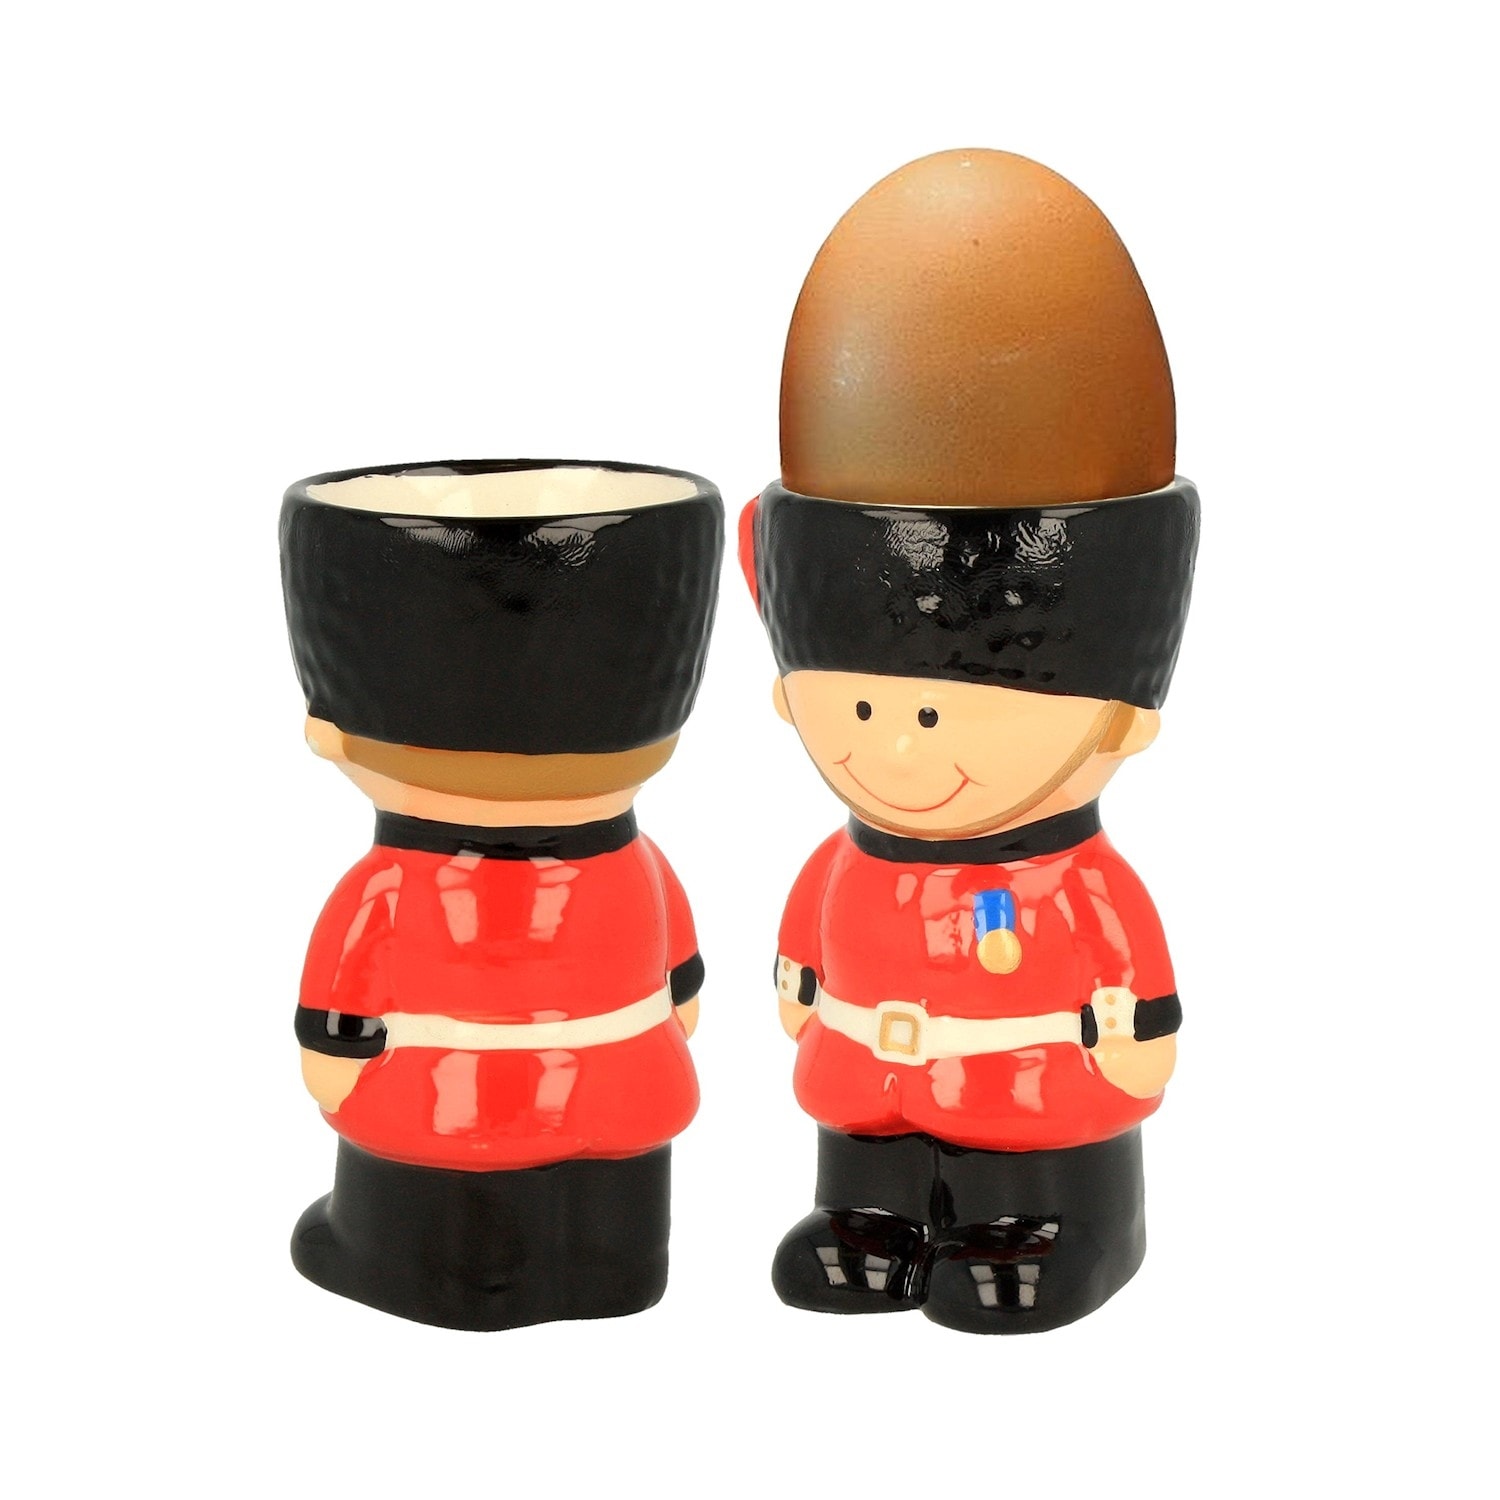 https://ak1.ostkcdn.com/images/products/is/images/direct/0b7f42ca3cf72830572f0f83b94f6925a2110bc4/Elgate-Products-Ceramic-British-Egg-Cups---Decorative-Soft-Boiled-Egg-Holders---Bobby-Policeman%2C-Palace-Guard-or-Queen-Elizabeth.jpg